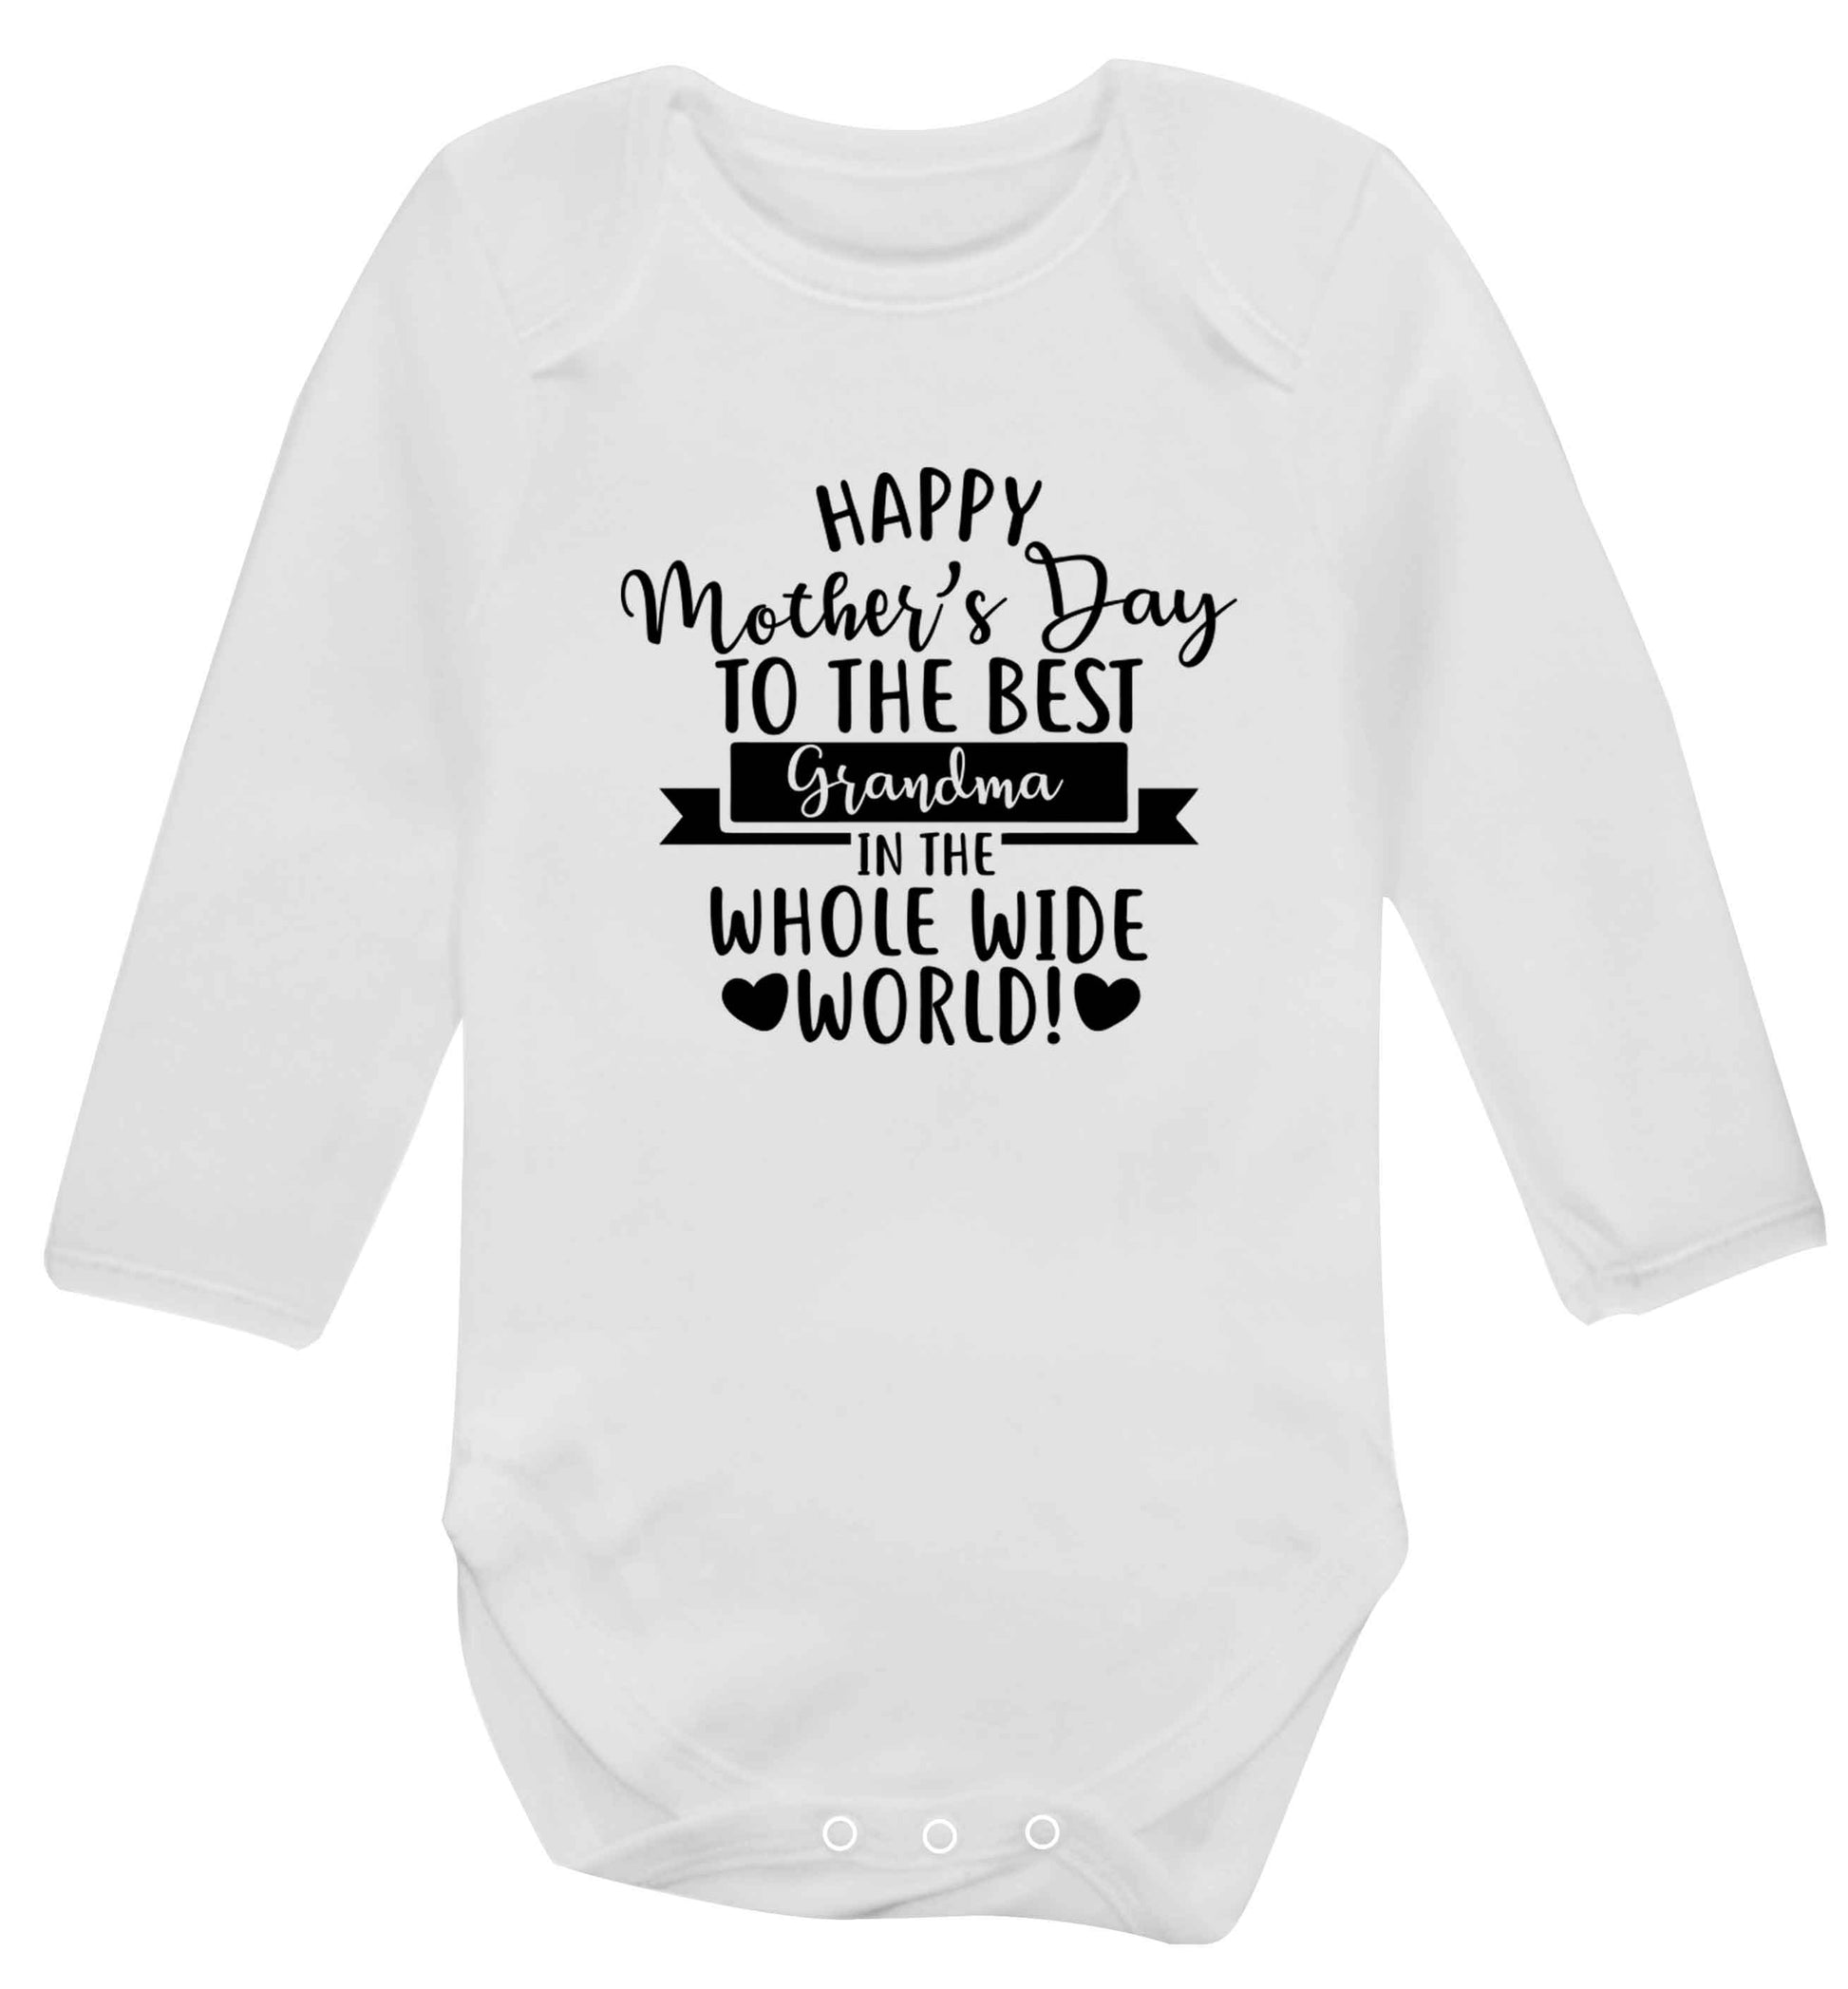 Happy mother's day to the best grandma in the world baby vest long sleeved white 6-12 months